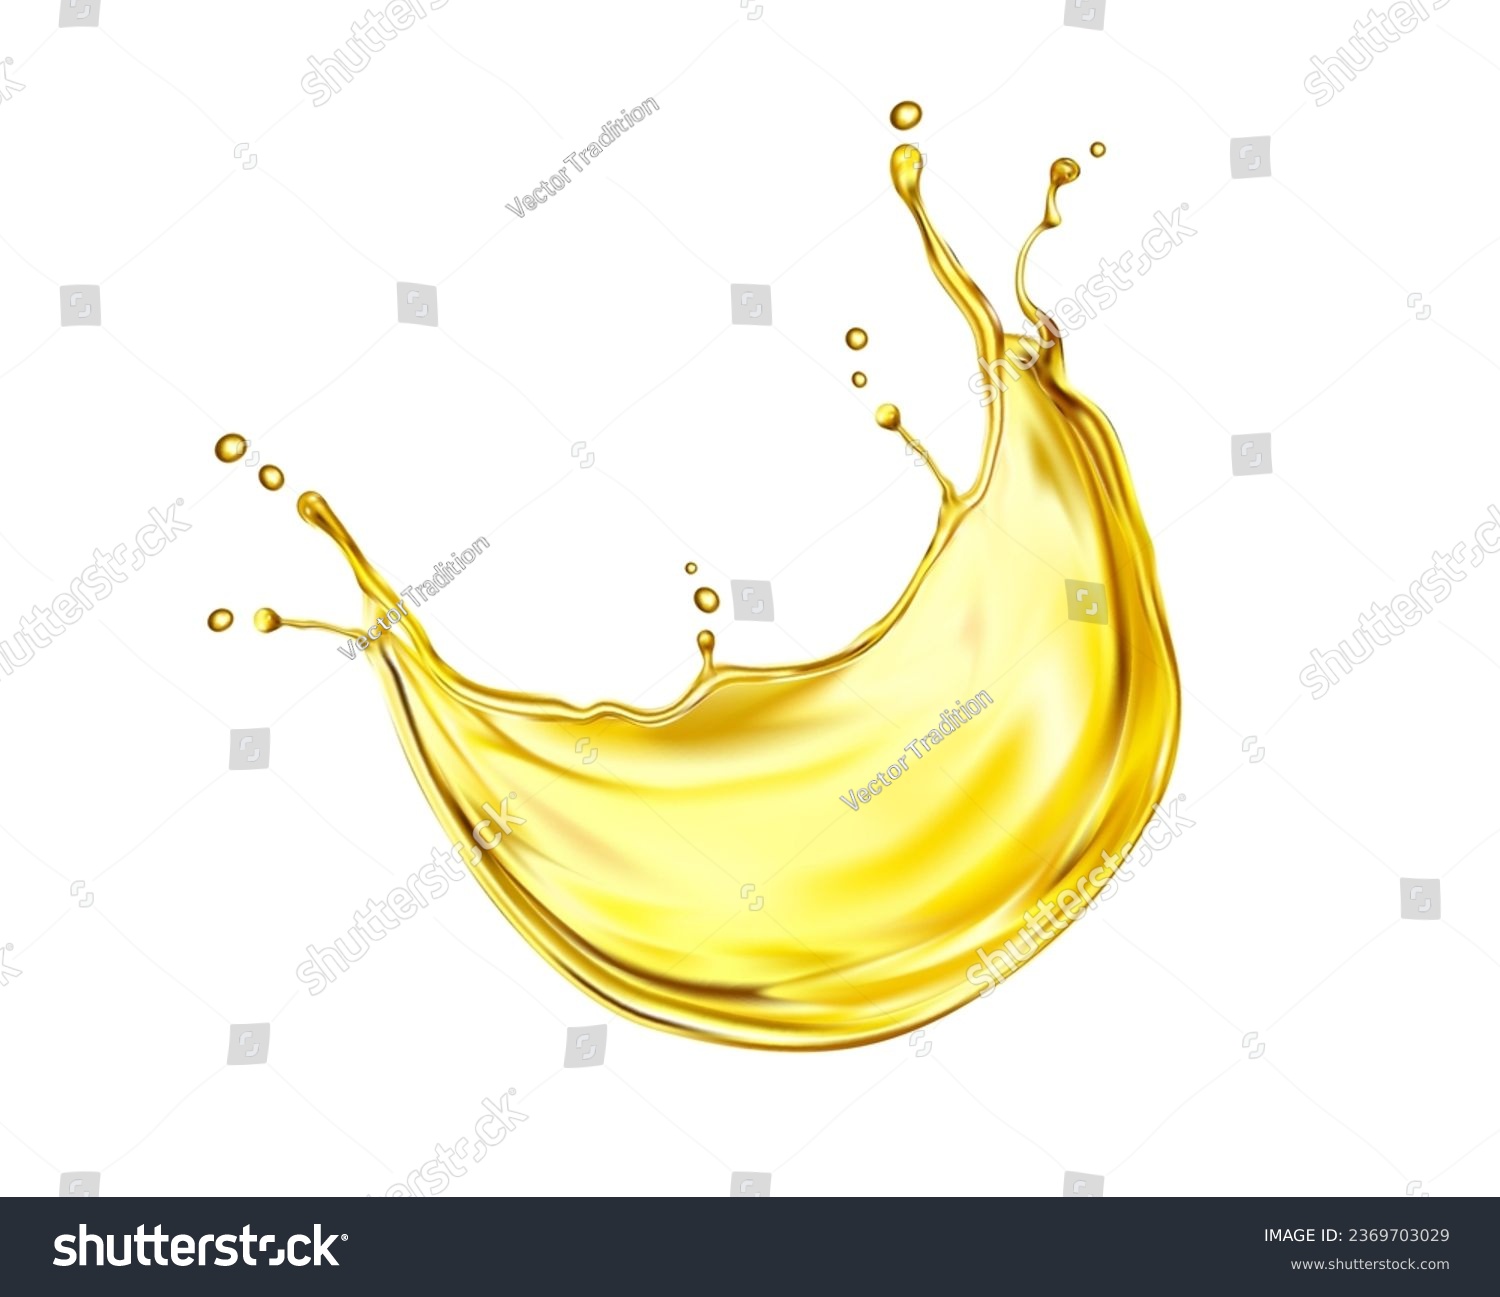 SVG of Oil or juice swirl splash. Transparent wave flow of fruit drink or food cooking oil with gold drops. Vector 3d wavy spill motion of olive oil, apple juice or lemonade with ripples and bubbles svg